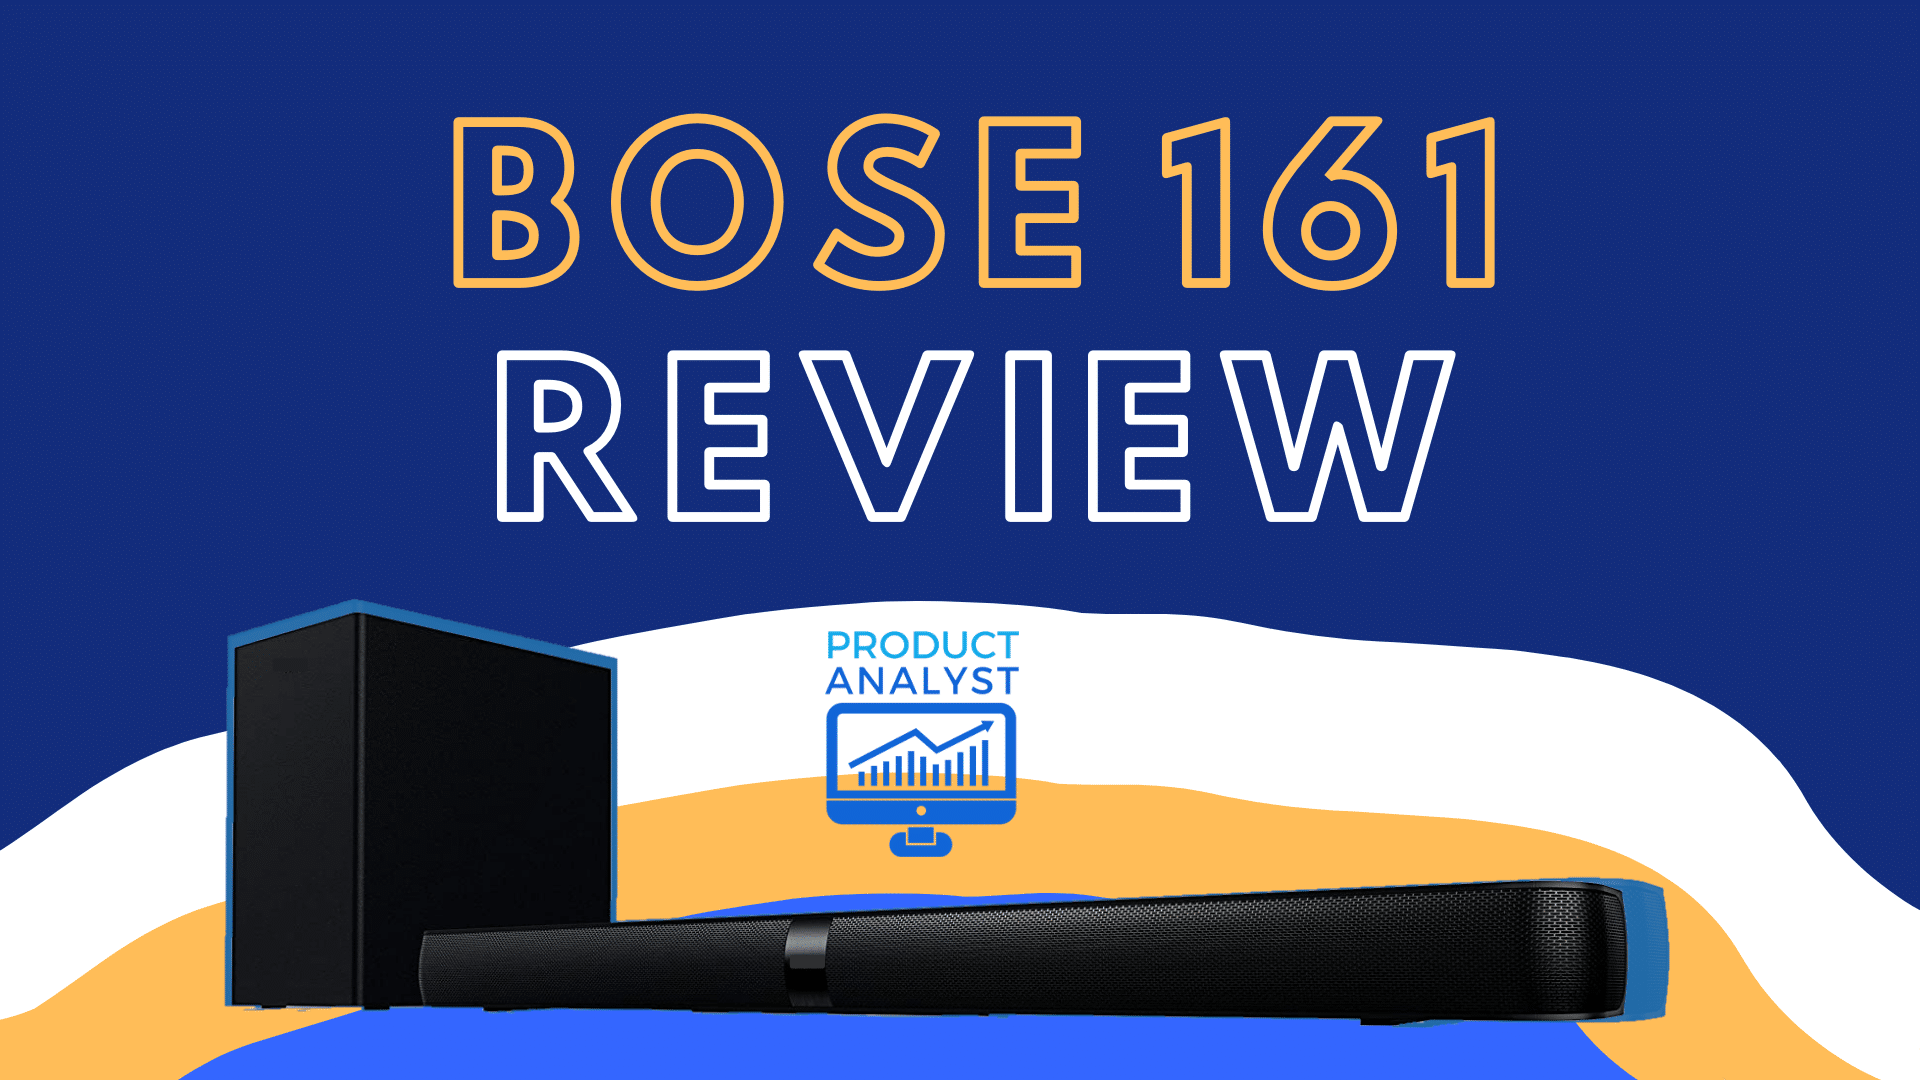 Bose 161 Review